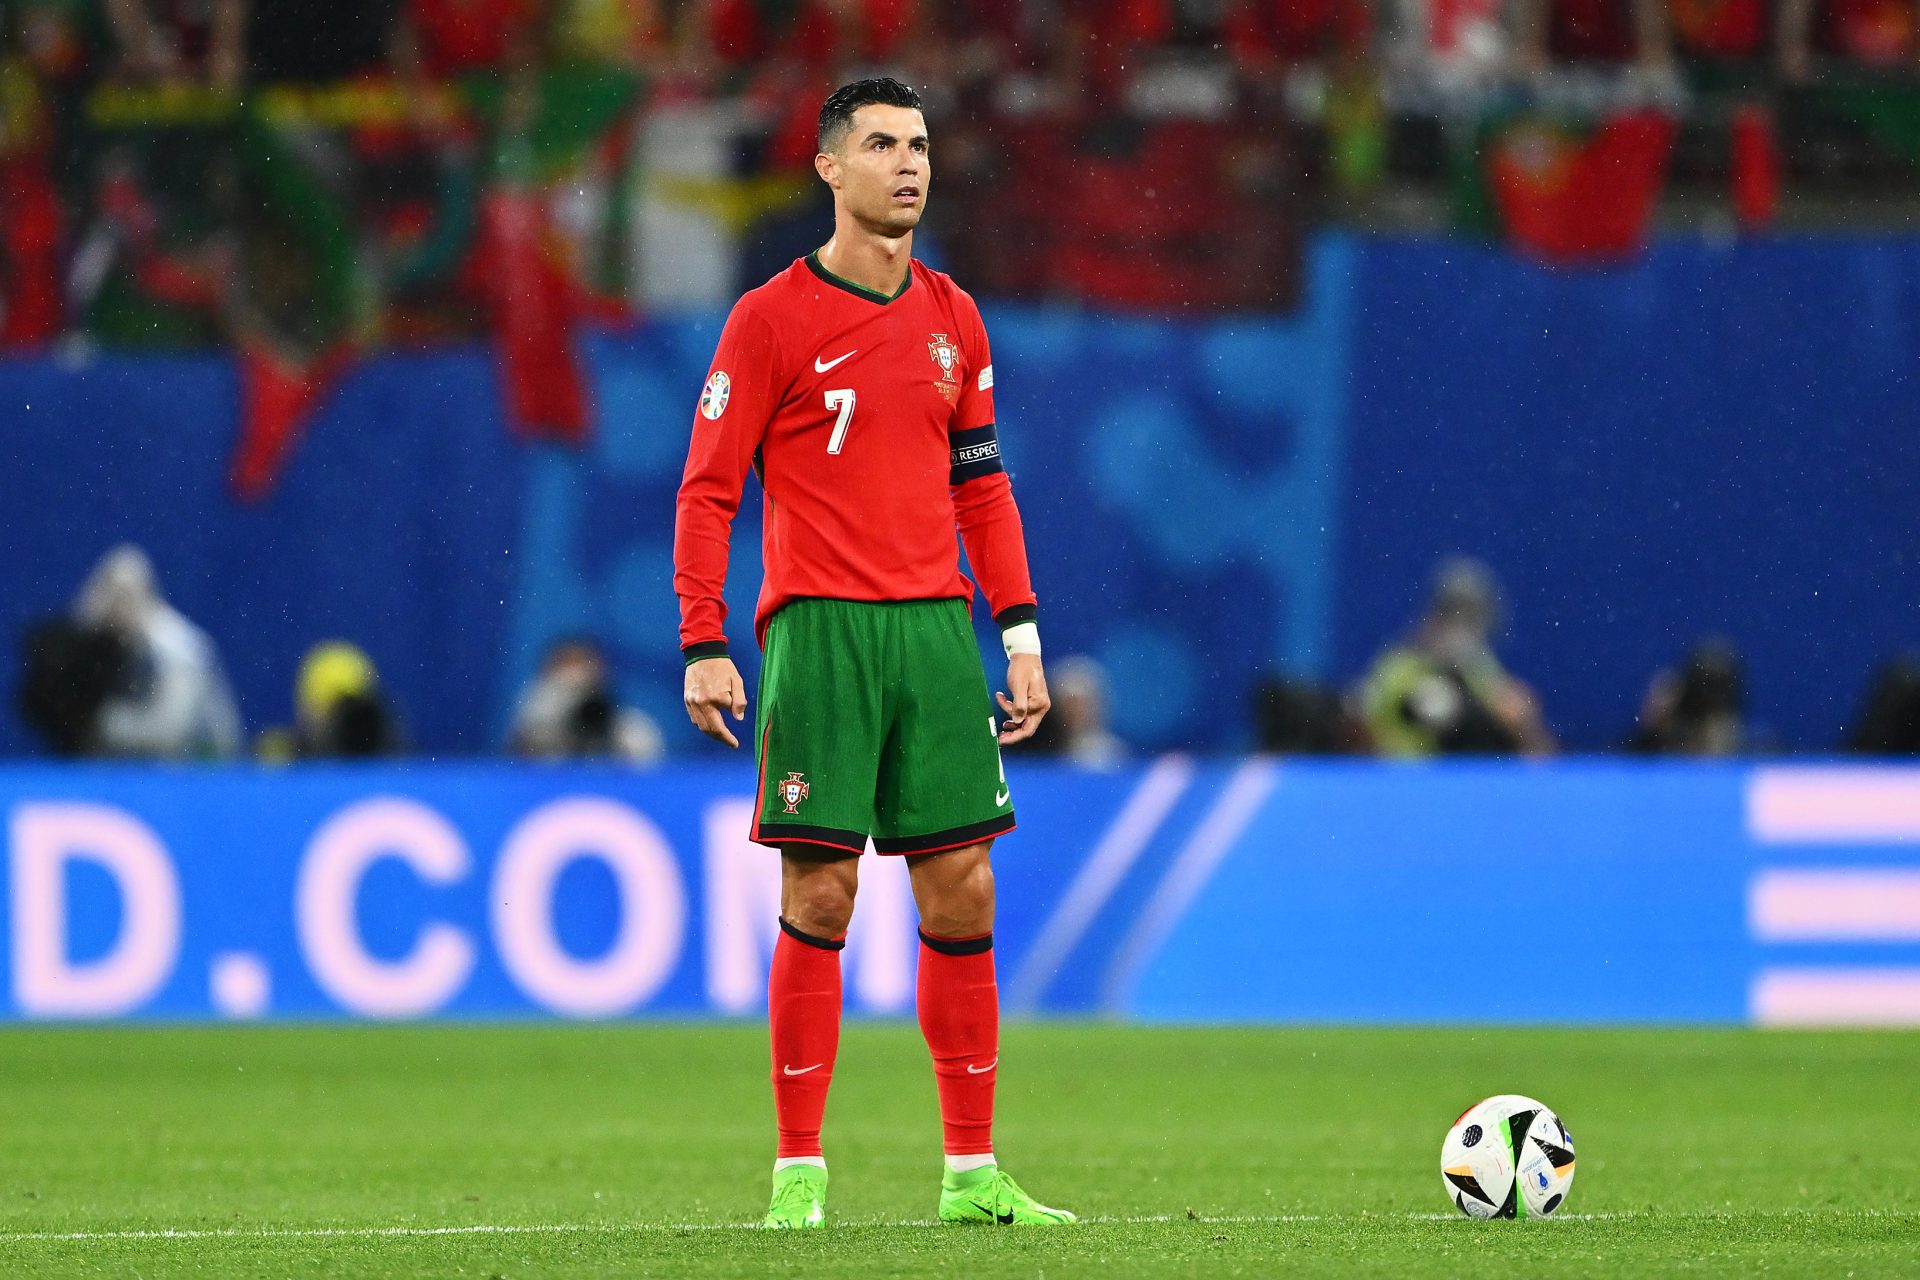 Cristiano Ronaldo slammed after Portugal game: 'Messi would not do that'